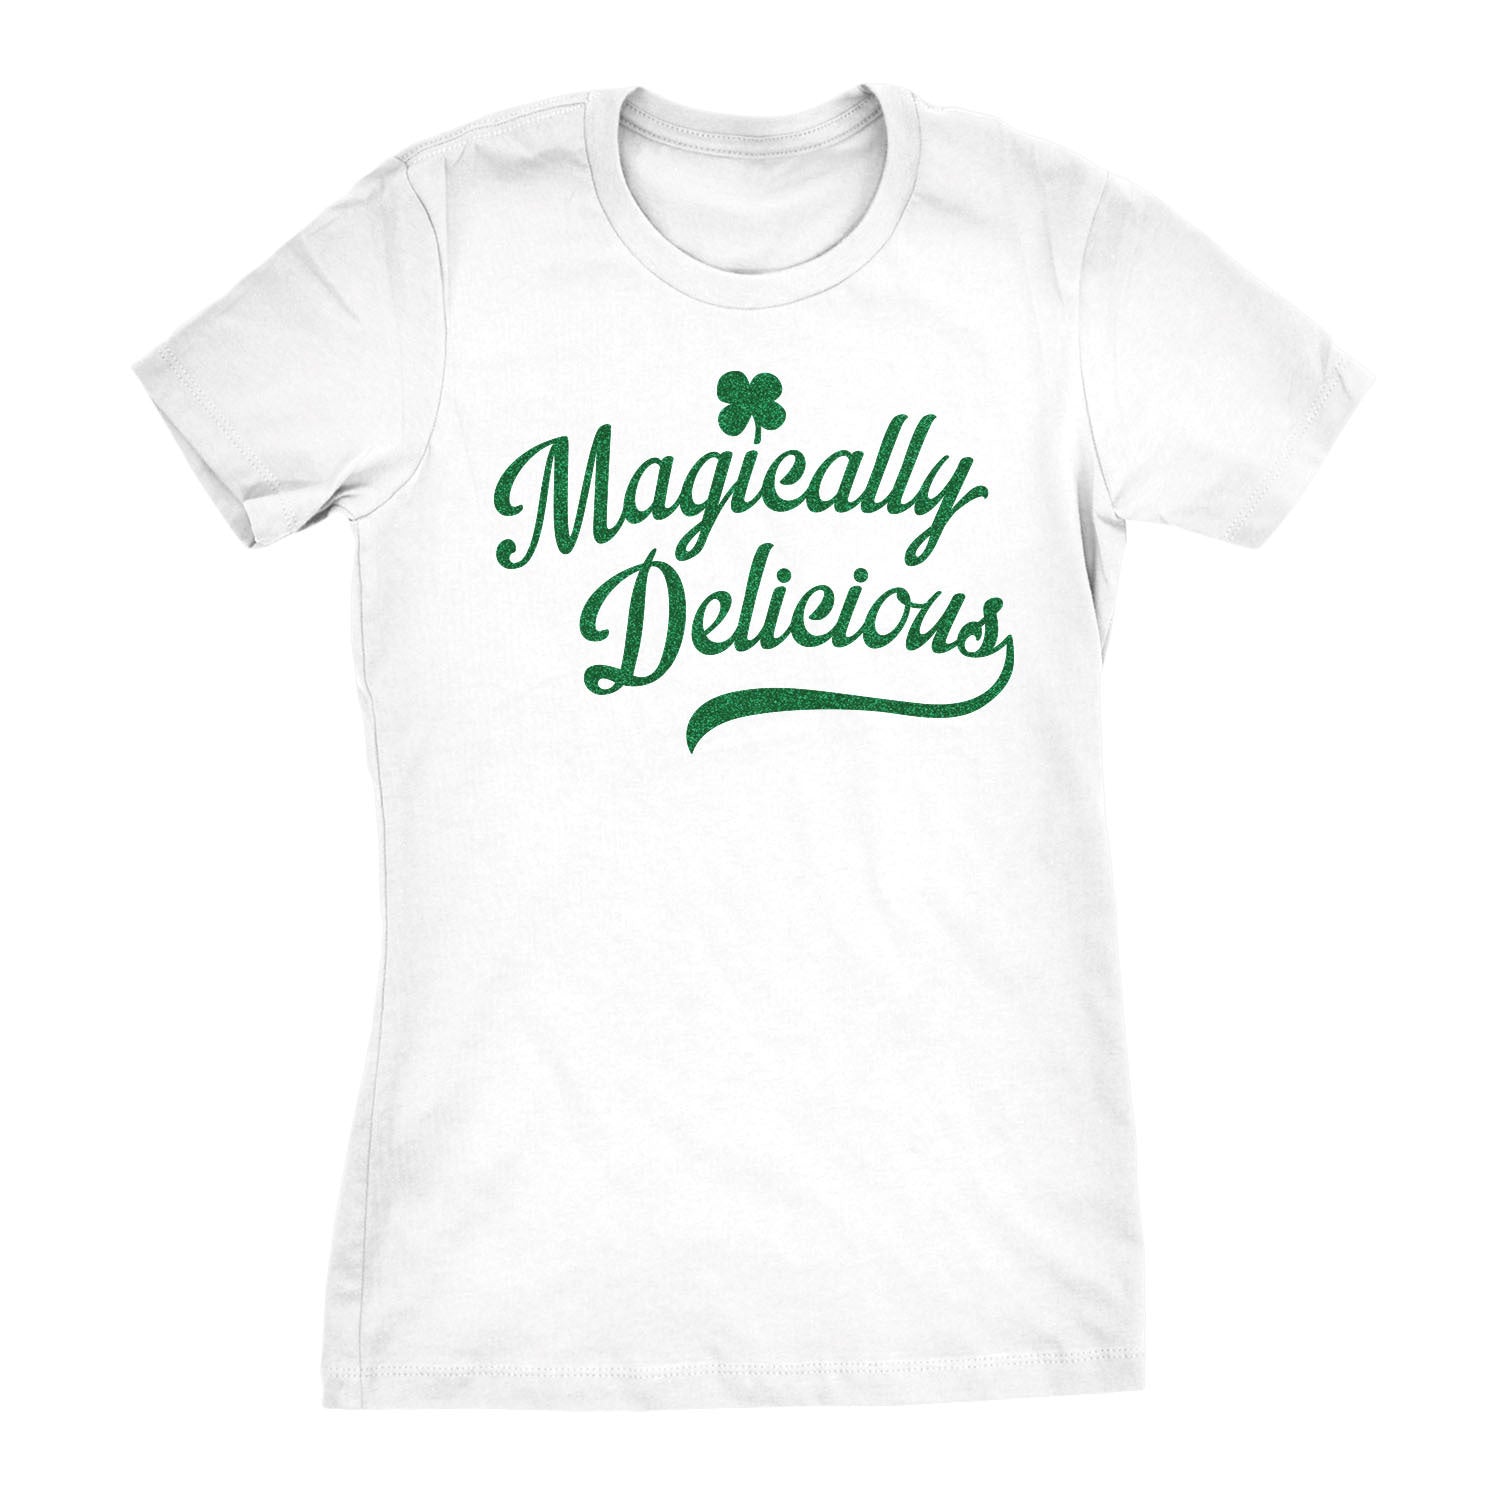 Funny White Magically Delicious Womens T Shirt Nerdy Saint Patrick's Day Tee